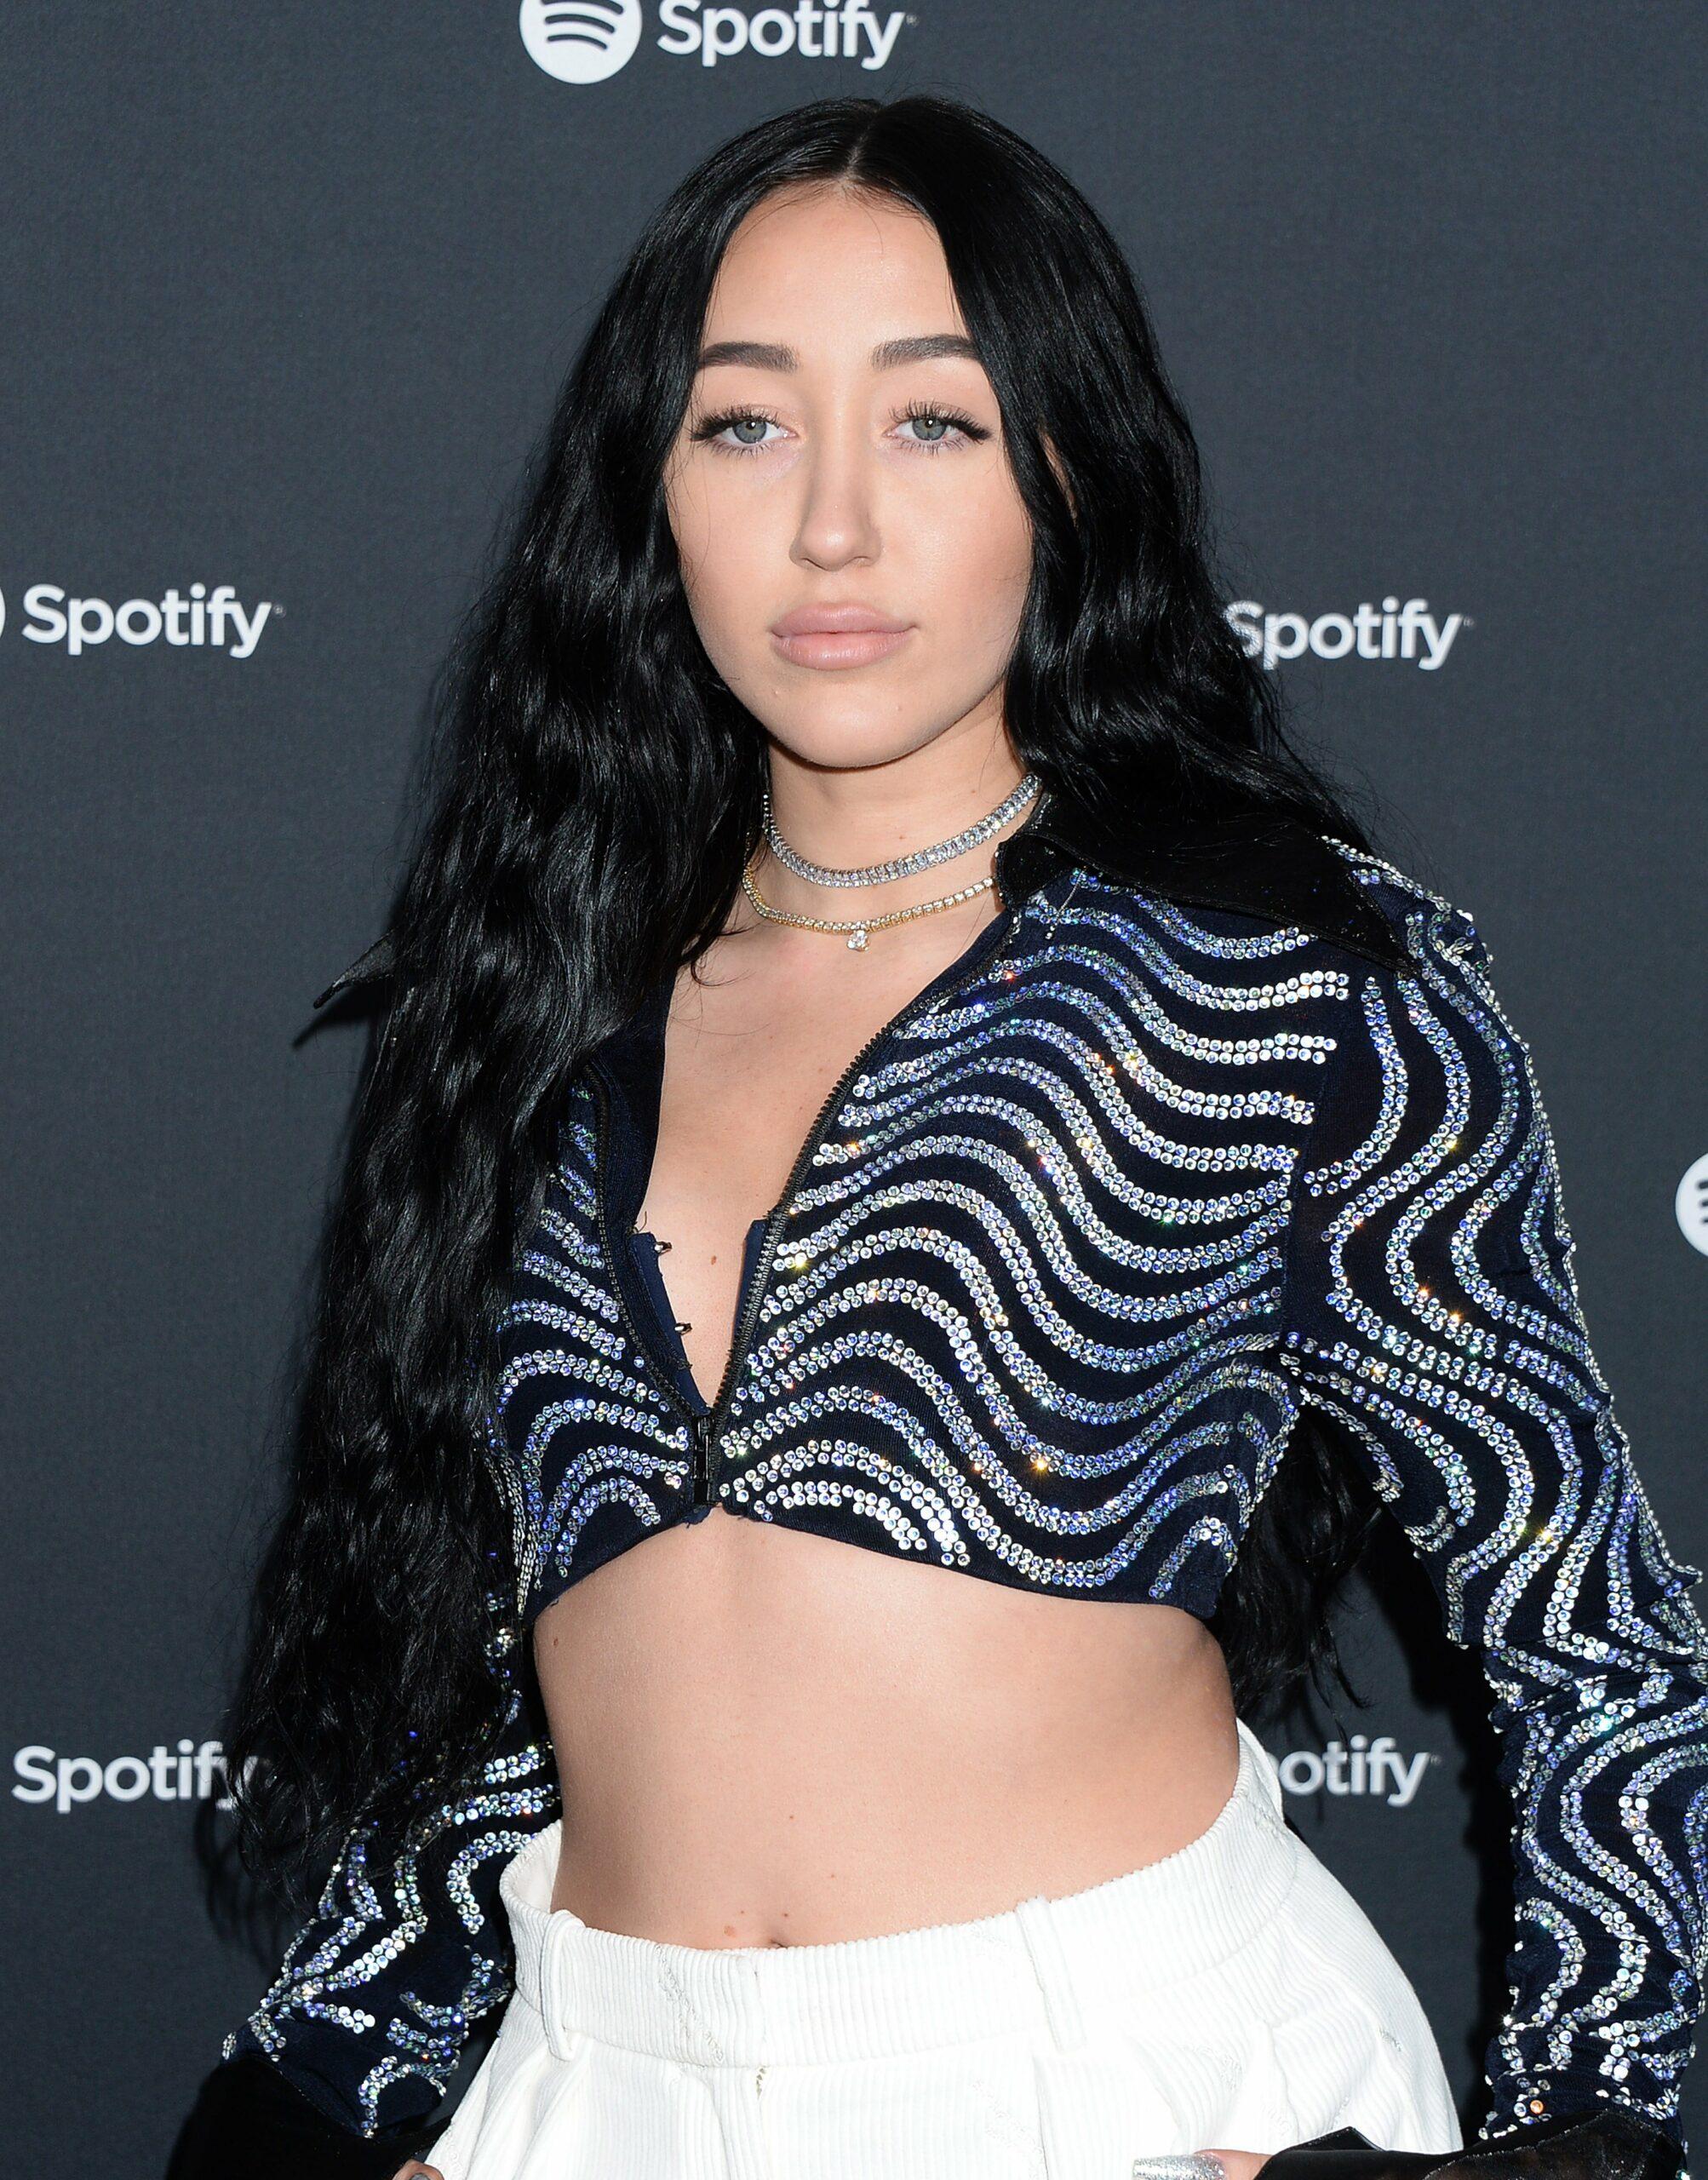 Noah Cyrus at Spotify Best New Artist 2020 Party